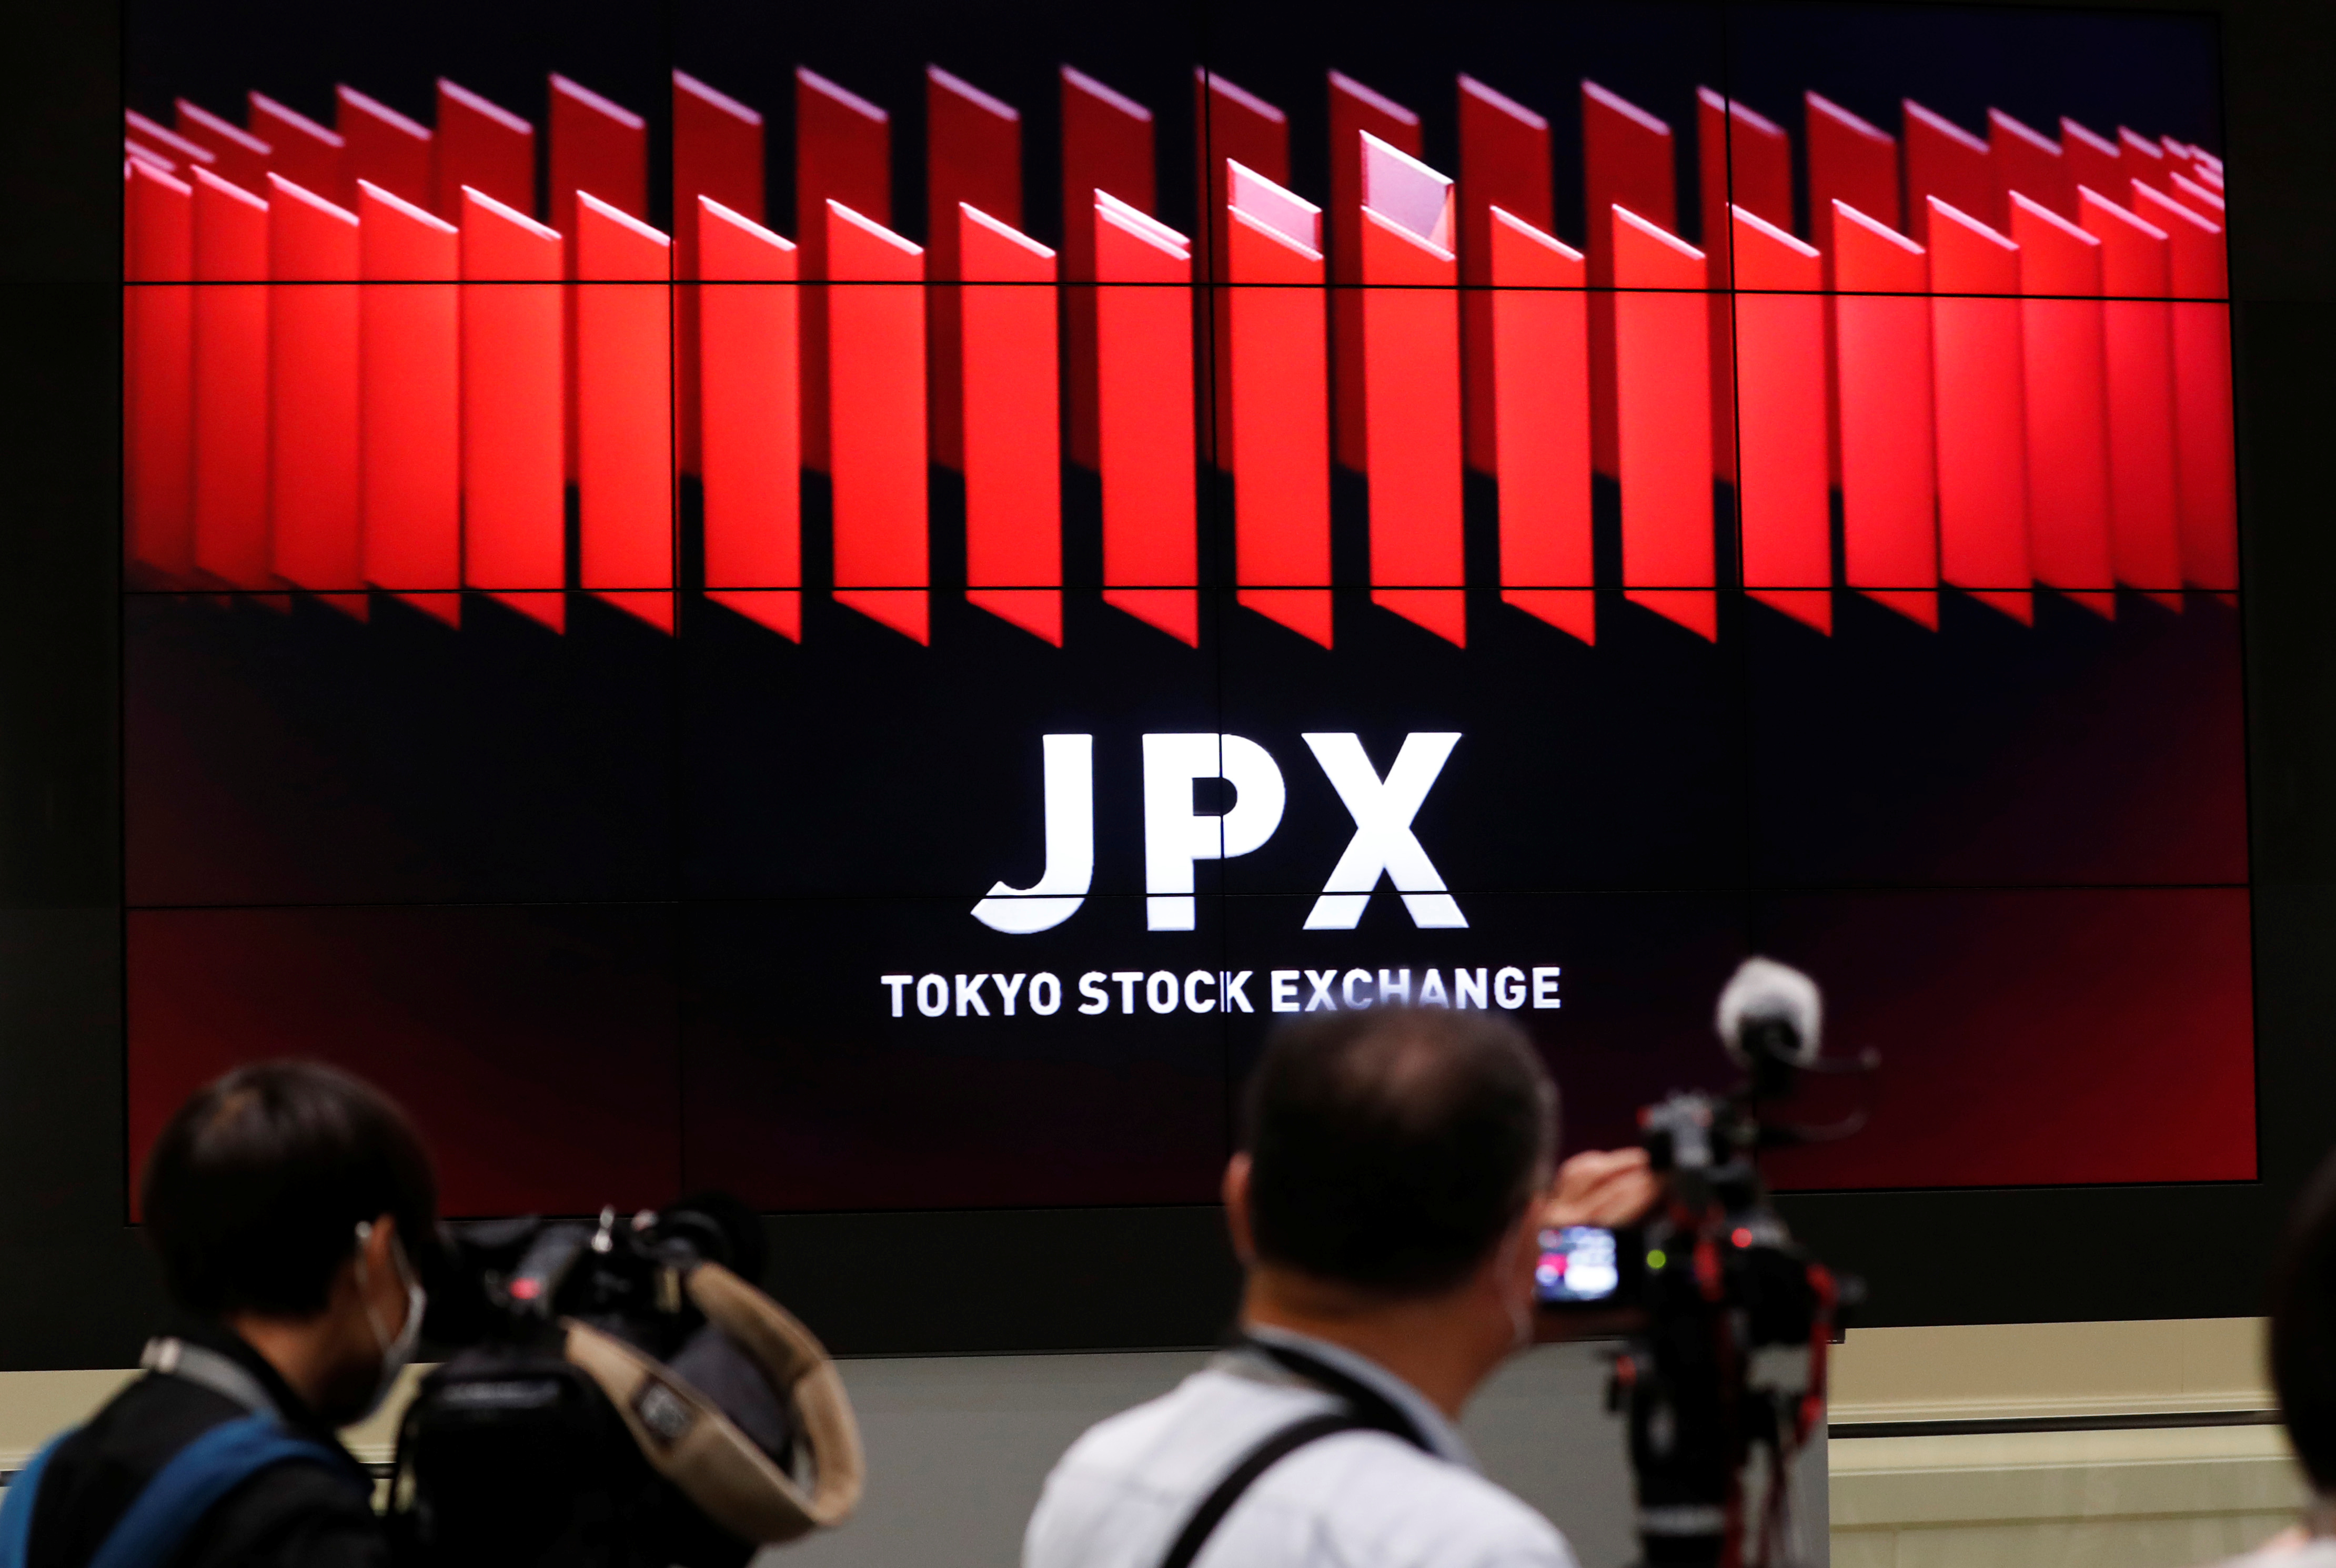 TV camera men wait for the opening of market in front of a large screen showing stock prices at the Tokyo Stock Exchange in Tokyo